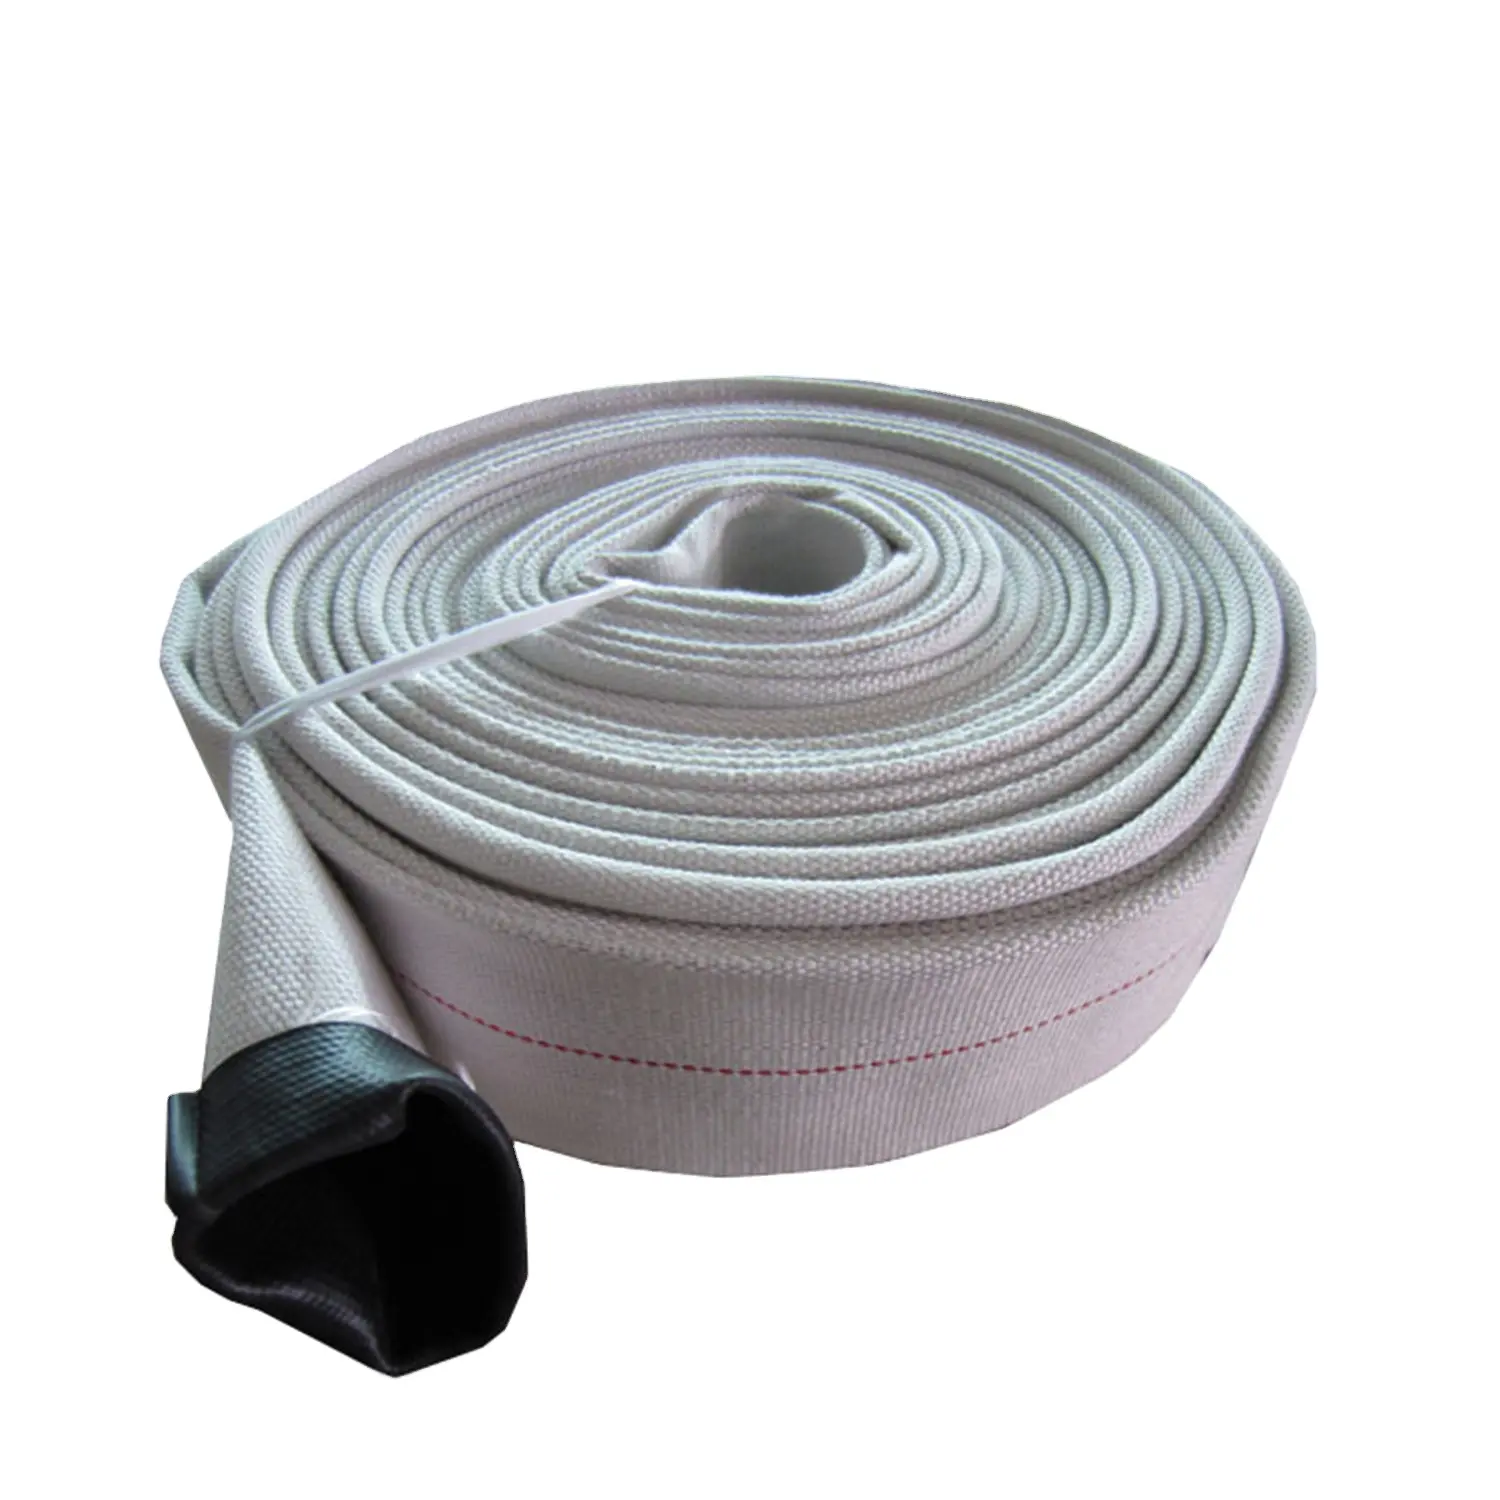 High Quality Customized PVC Fire Hose Lay Flat Flexible Agriculture Irrigation Equipment with Firefighting Accessories